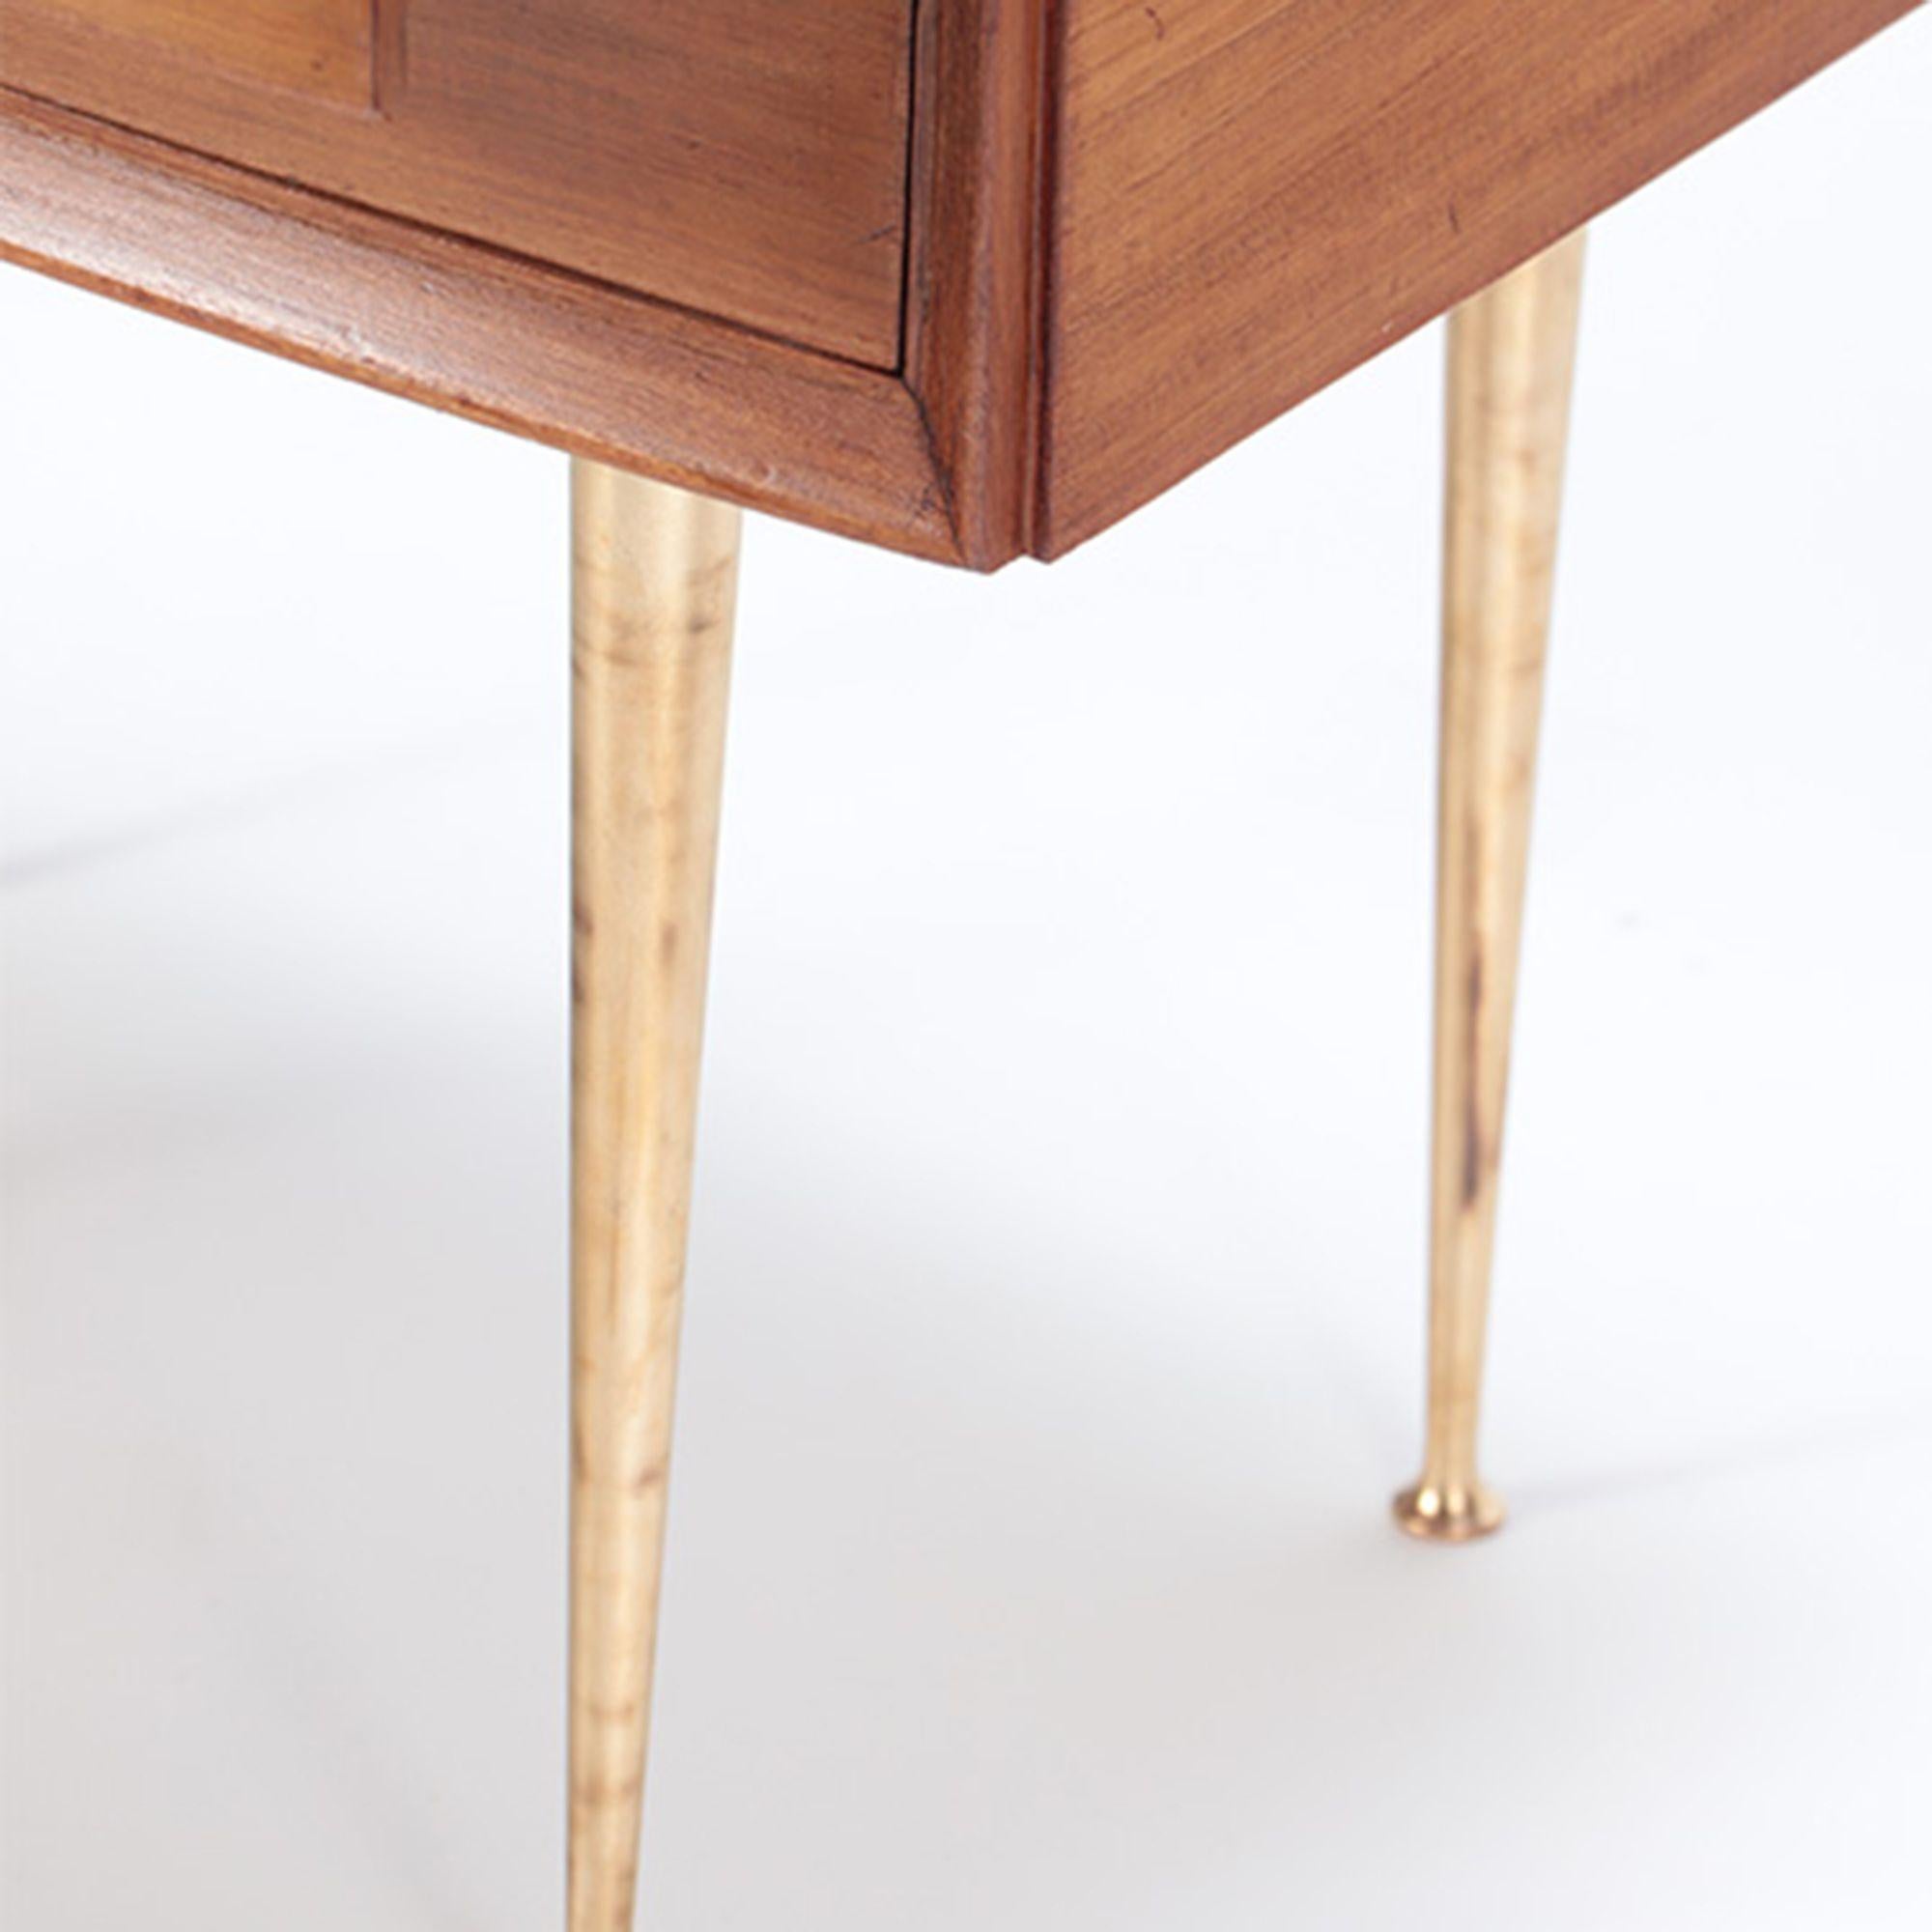 Pair of Mid-Century Modern Walnut and Brass Night Stands, circa 1955 For Sale 2